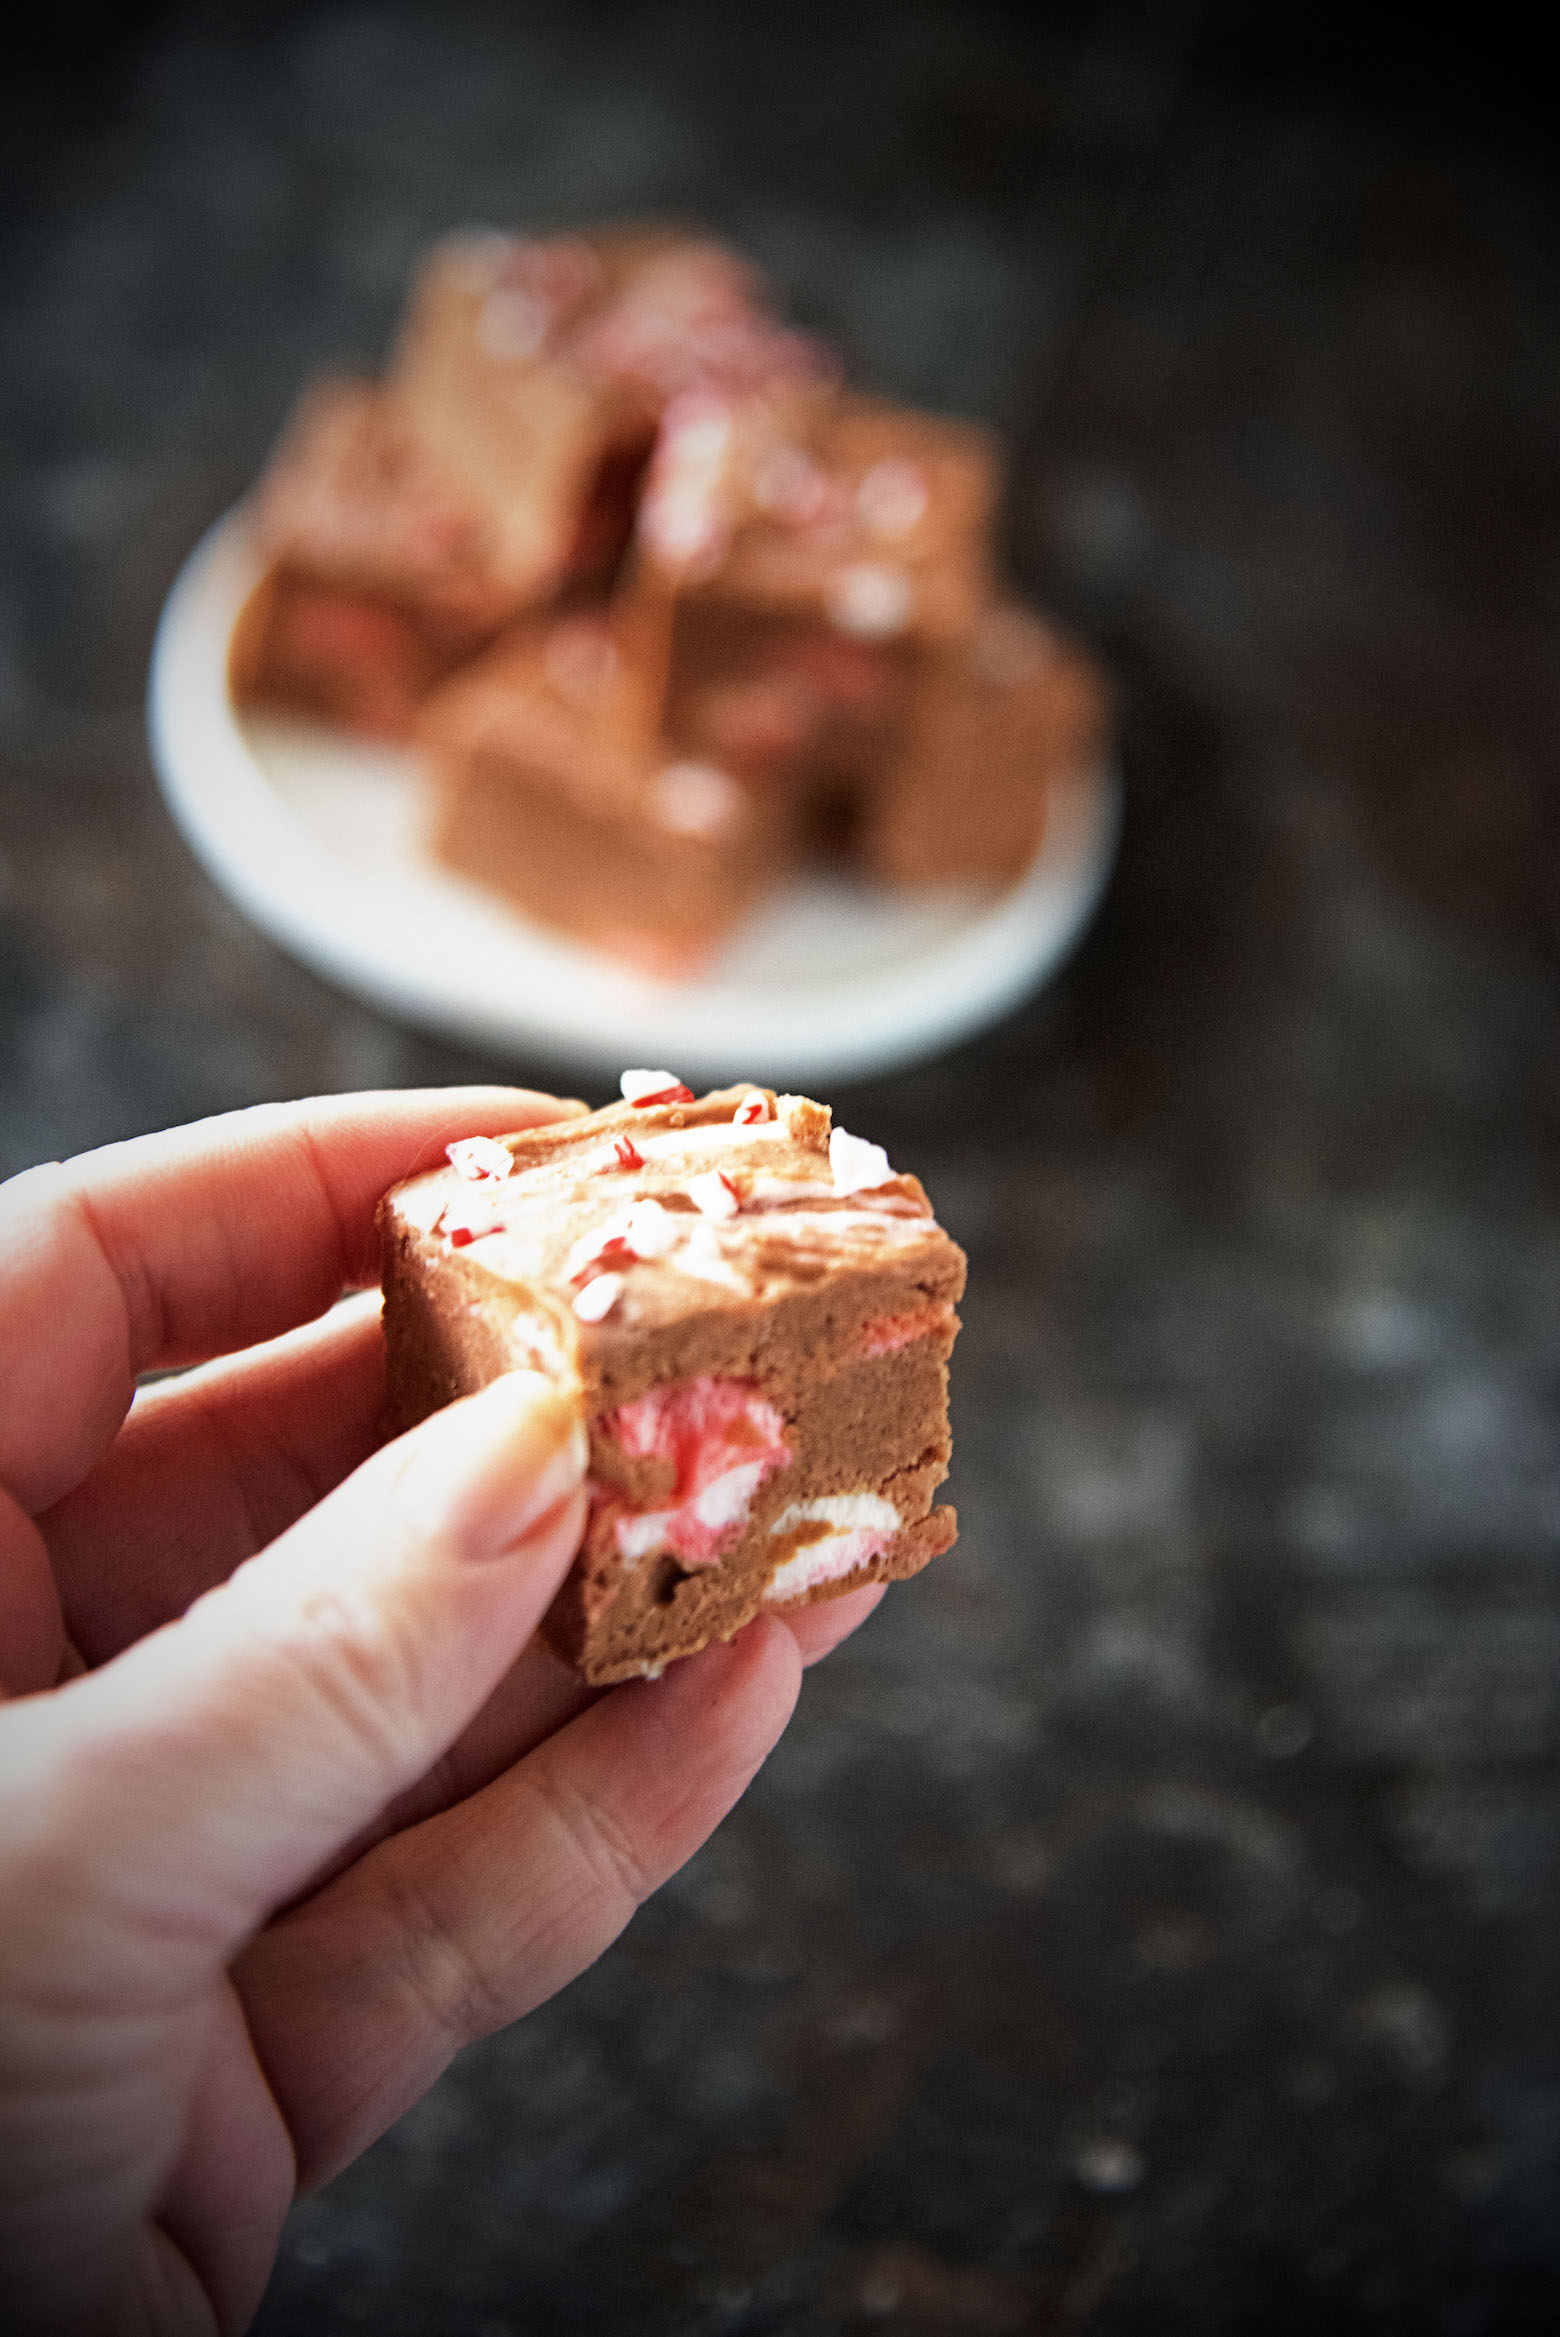 Spiked Peppermint Marshmallow Chocolate Fudge